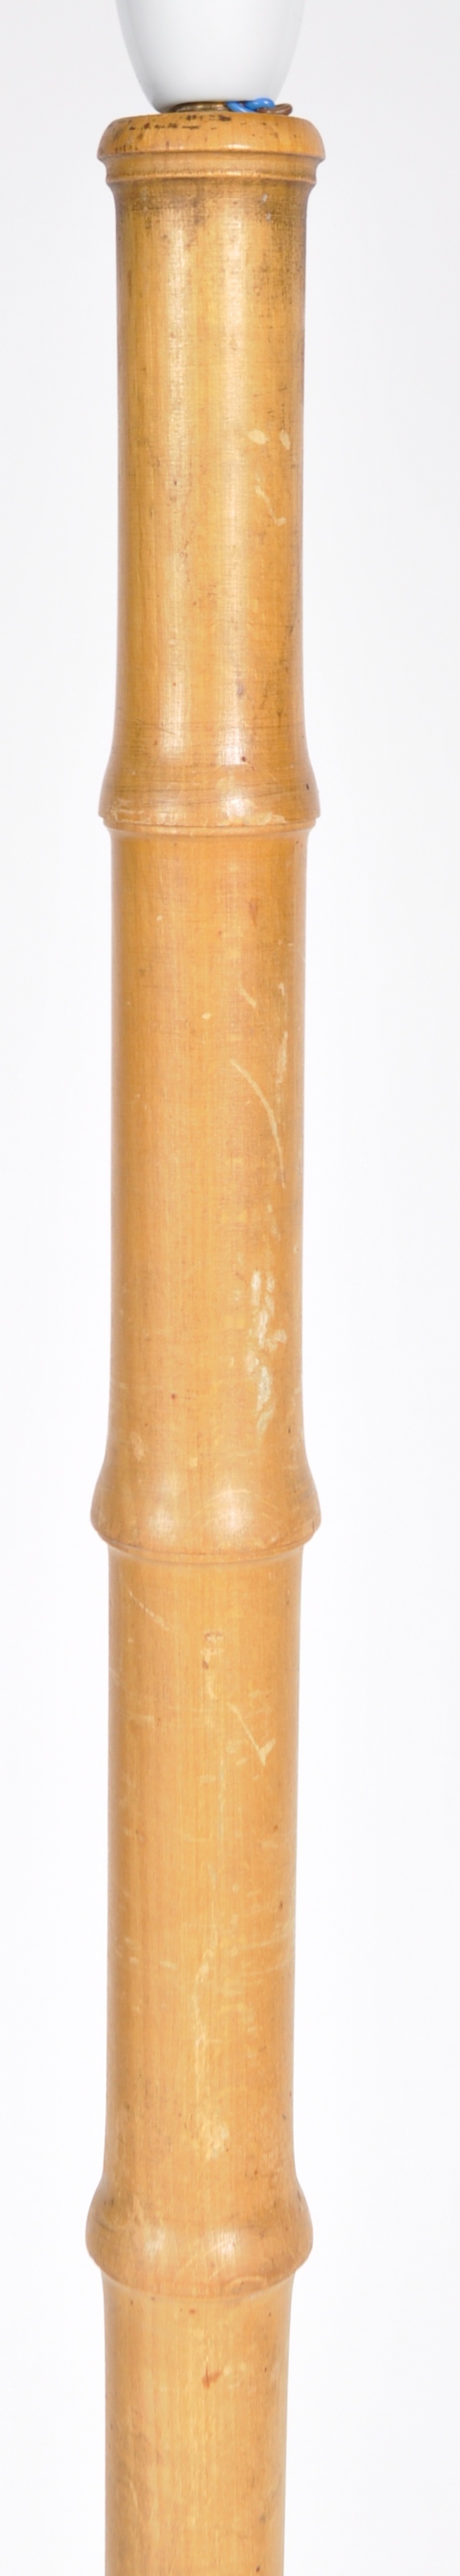 MID 20TH CENTURY FAUX BAMBOO STANDARD LAMP LIGHT - Image 3 of 4